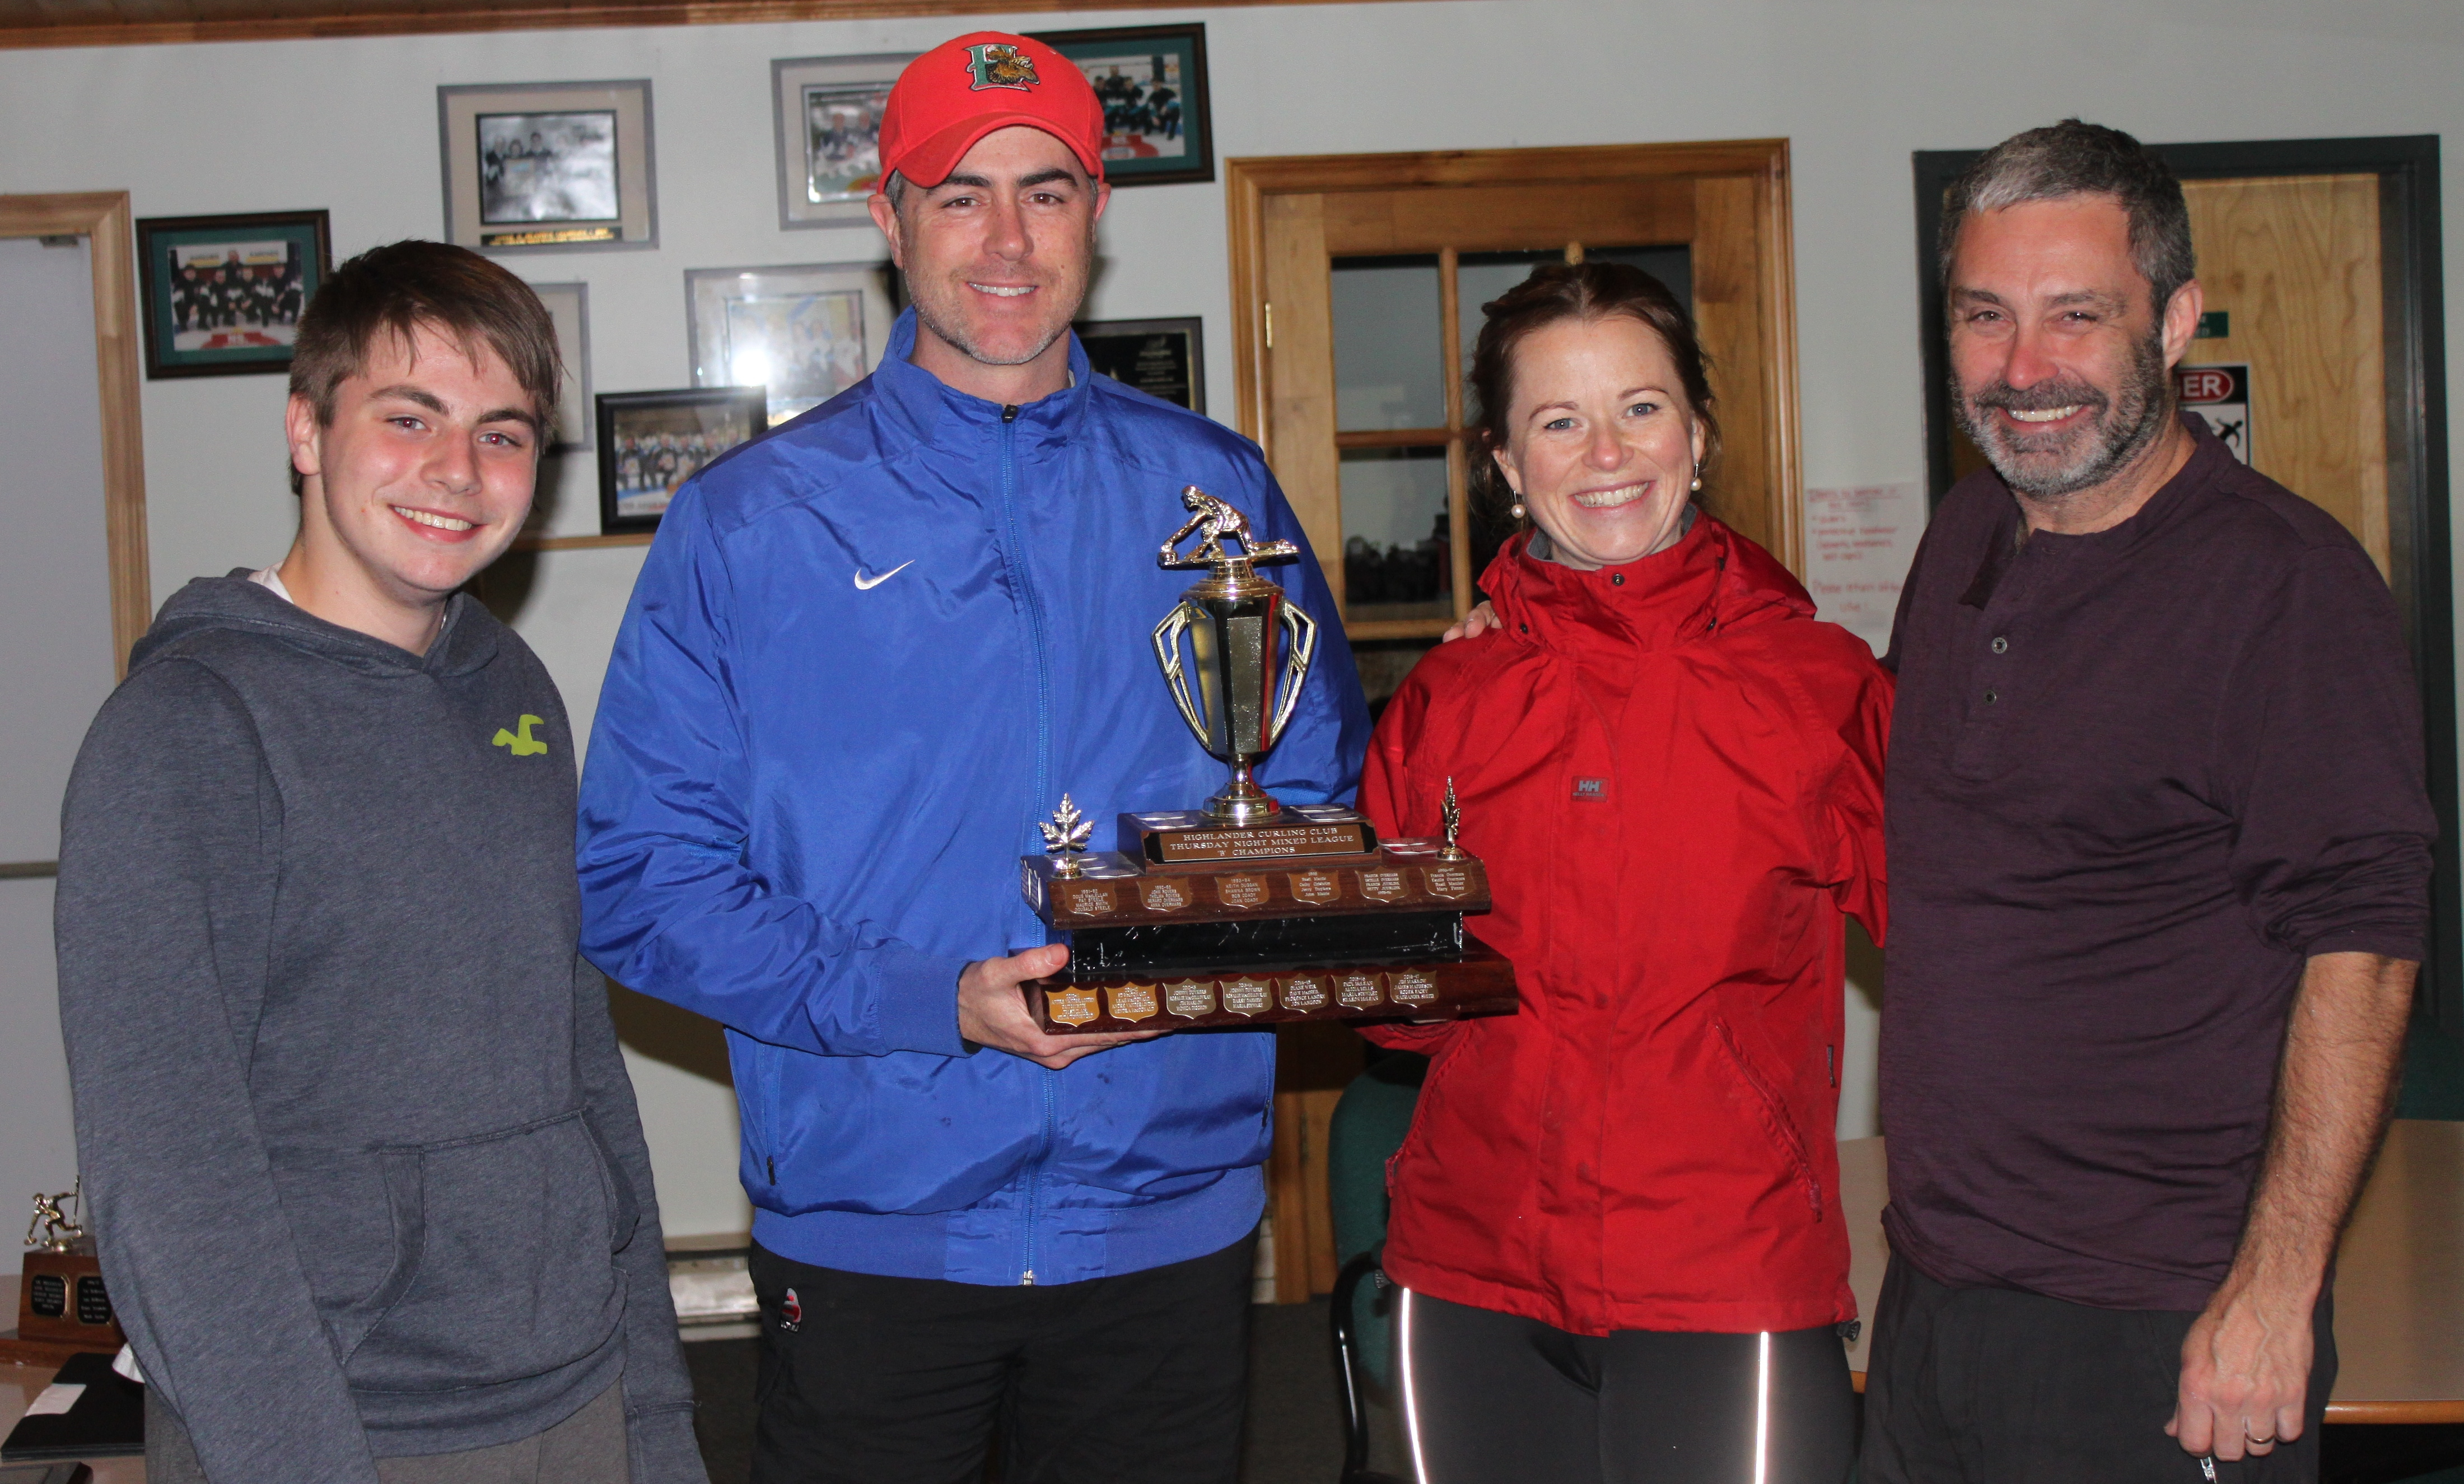 Thursday Night Mixed B-Division Champions
L to R: Nathaniel Smith, Derek Druhan, Candice MacKenzie, Mike Silver 
Missing: Leona Williams